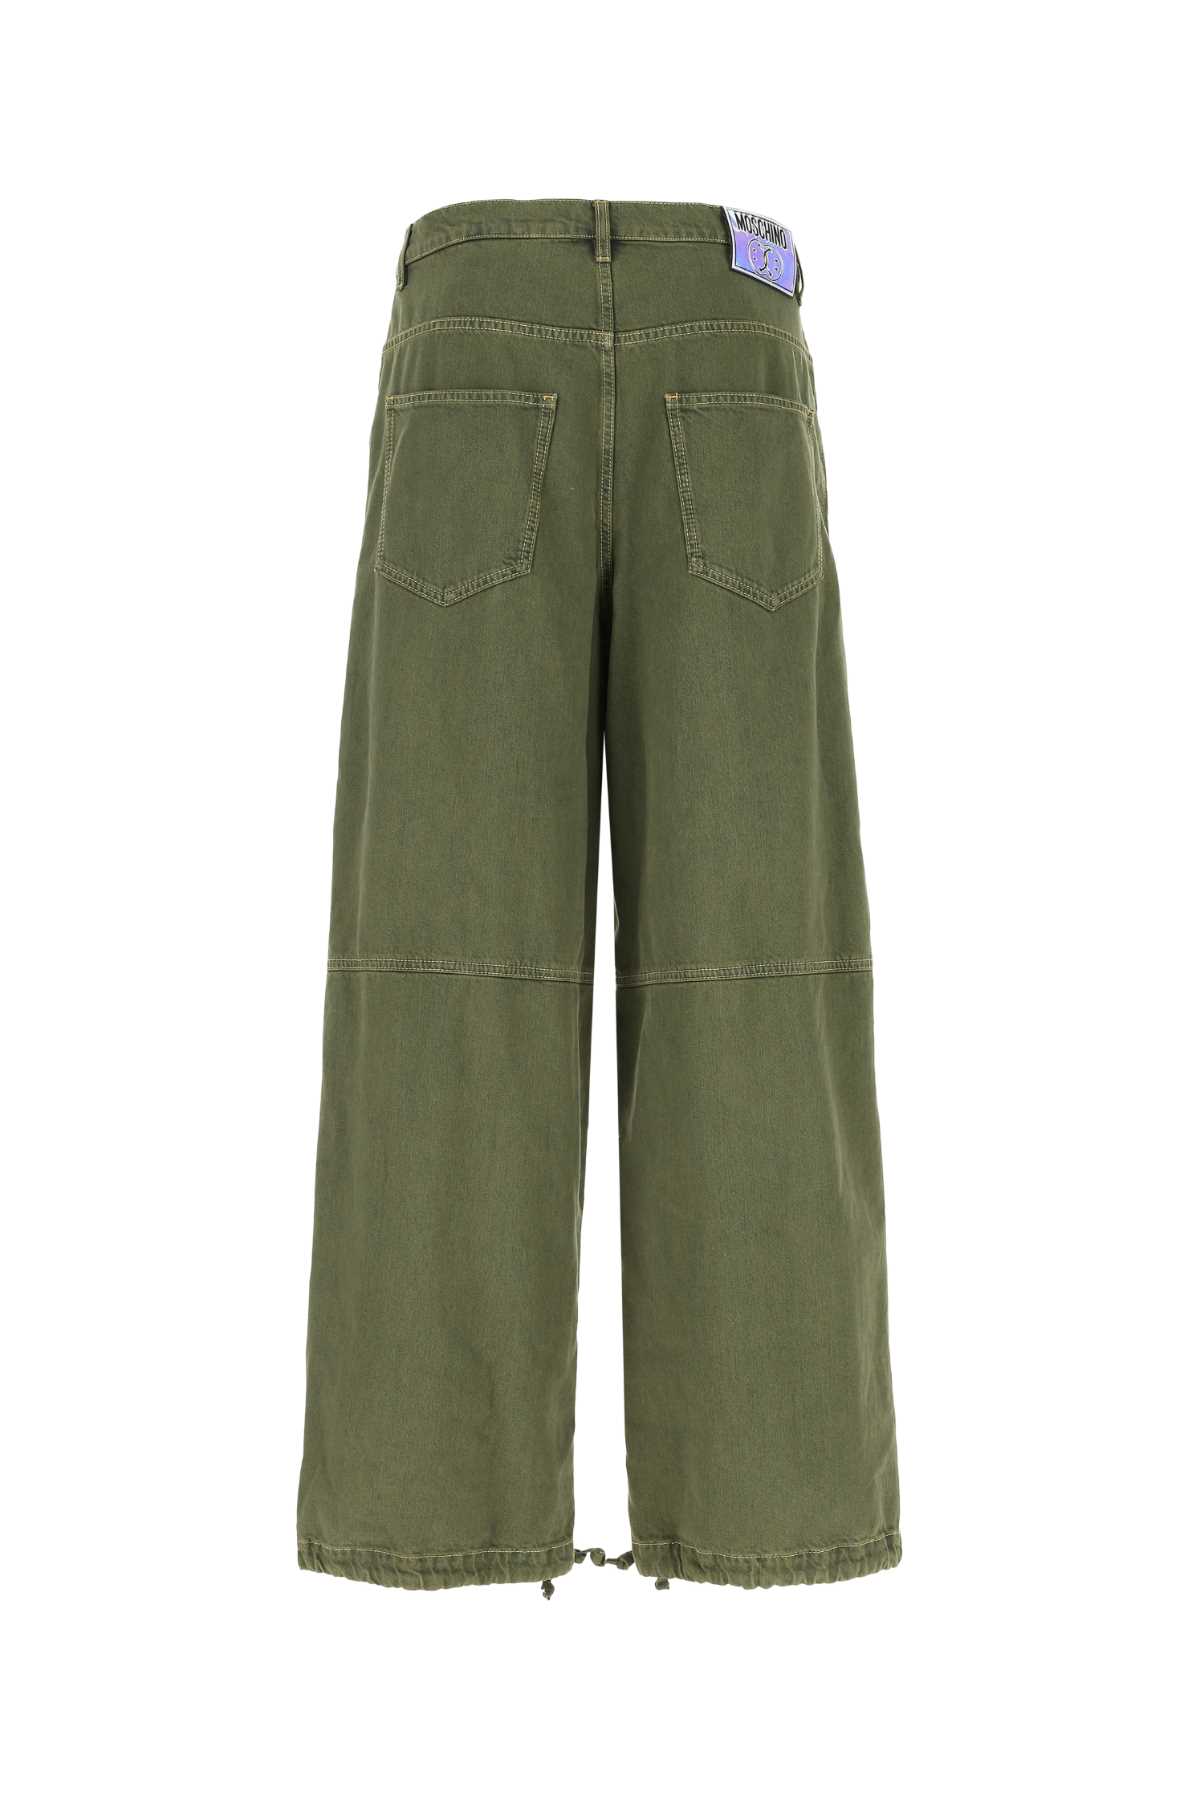 Moschino Army Green Denim Cargo Pant In 0443